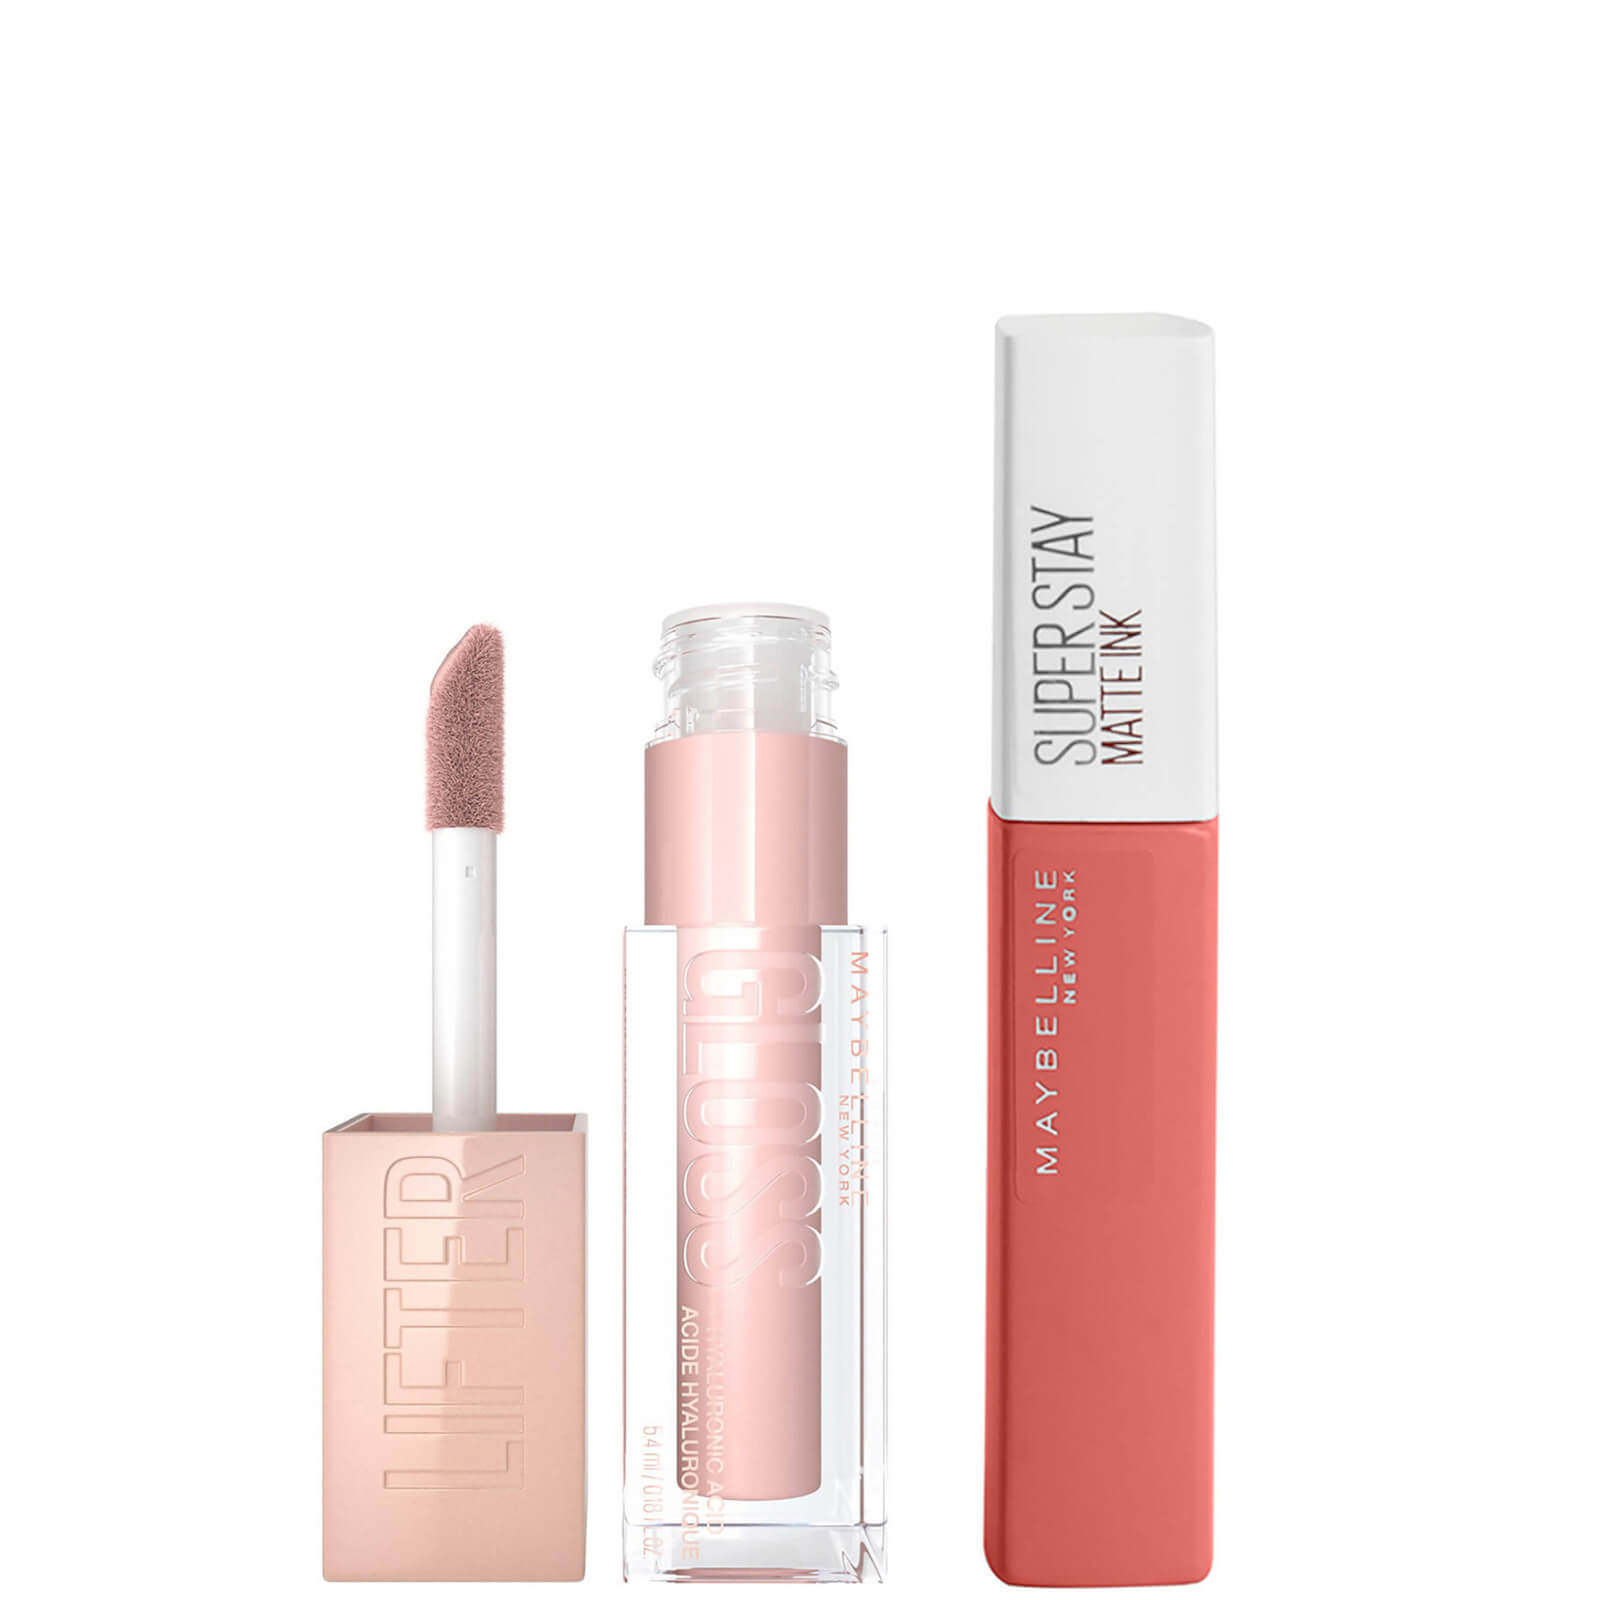 Maybelline Lifter Gloss and Superstay Matte Ink Lipstick Bundle (Various Shades) - 130 Self Starter